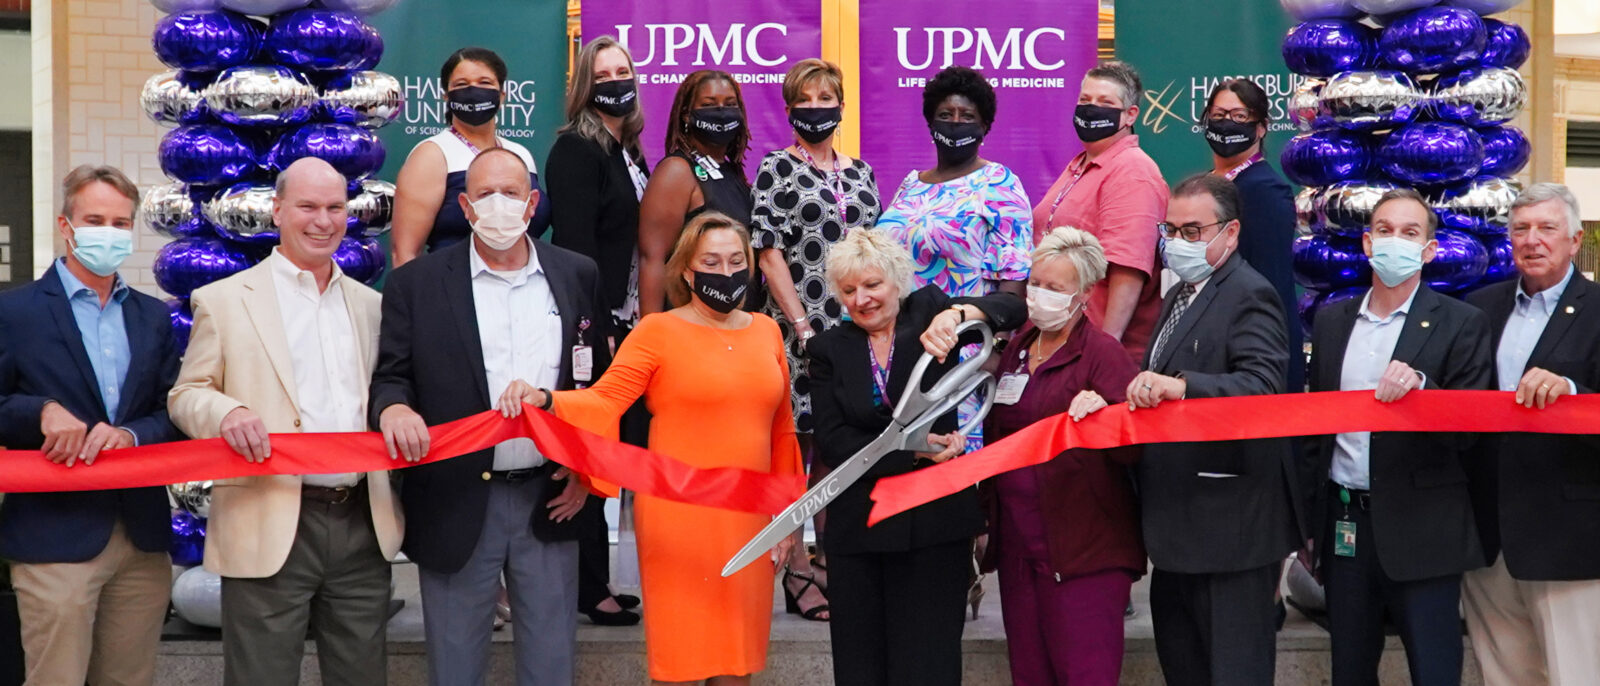 <strong>UPMC and Harrisburg University Celebrate Opening of New UPMC Shadyside School of Nursing at UPMC Harrisburg with a Ribbon-Cutting Ceremony</strong>